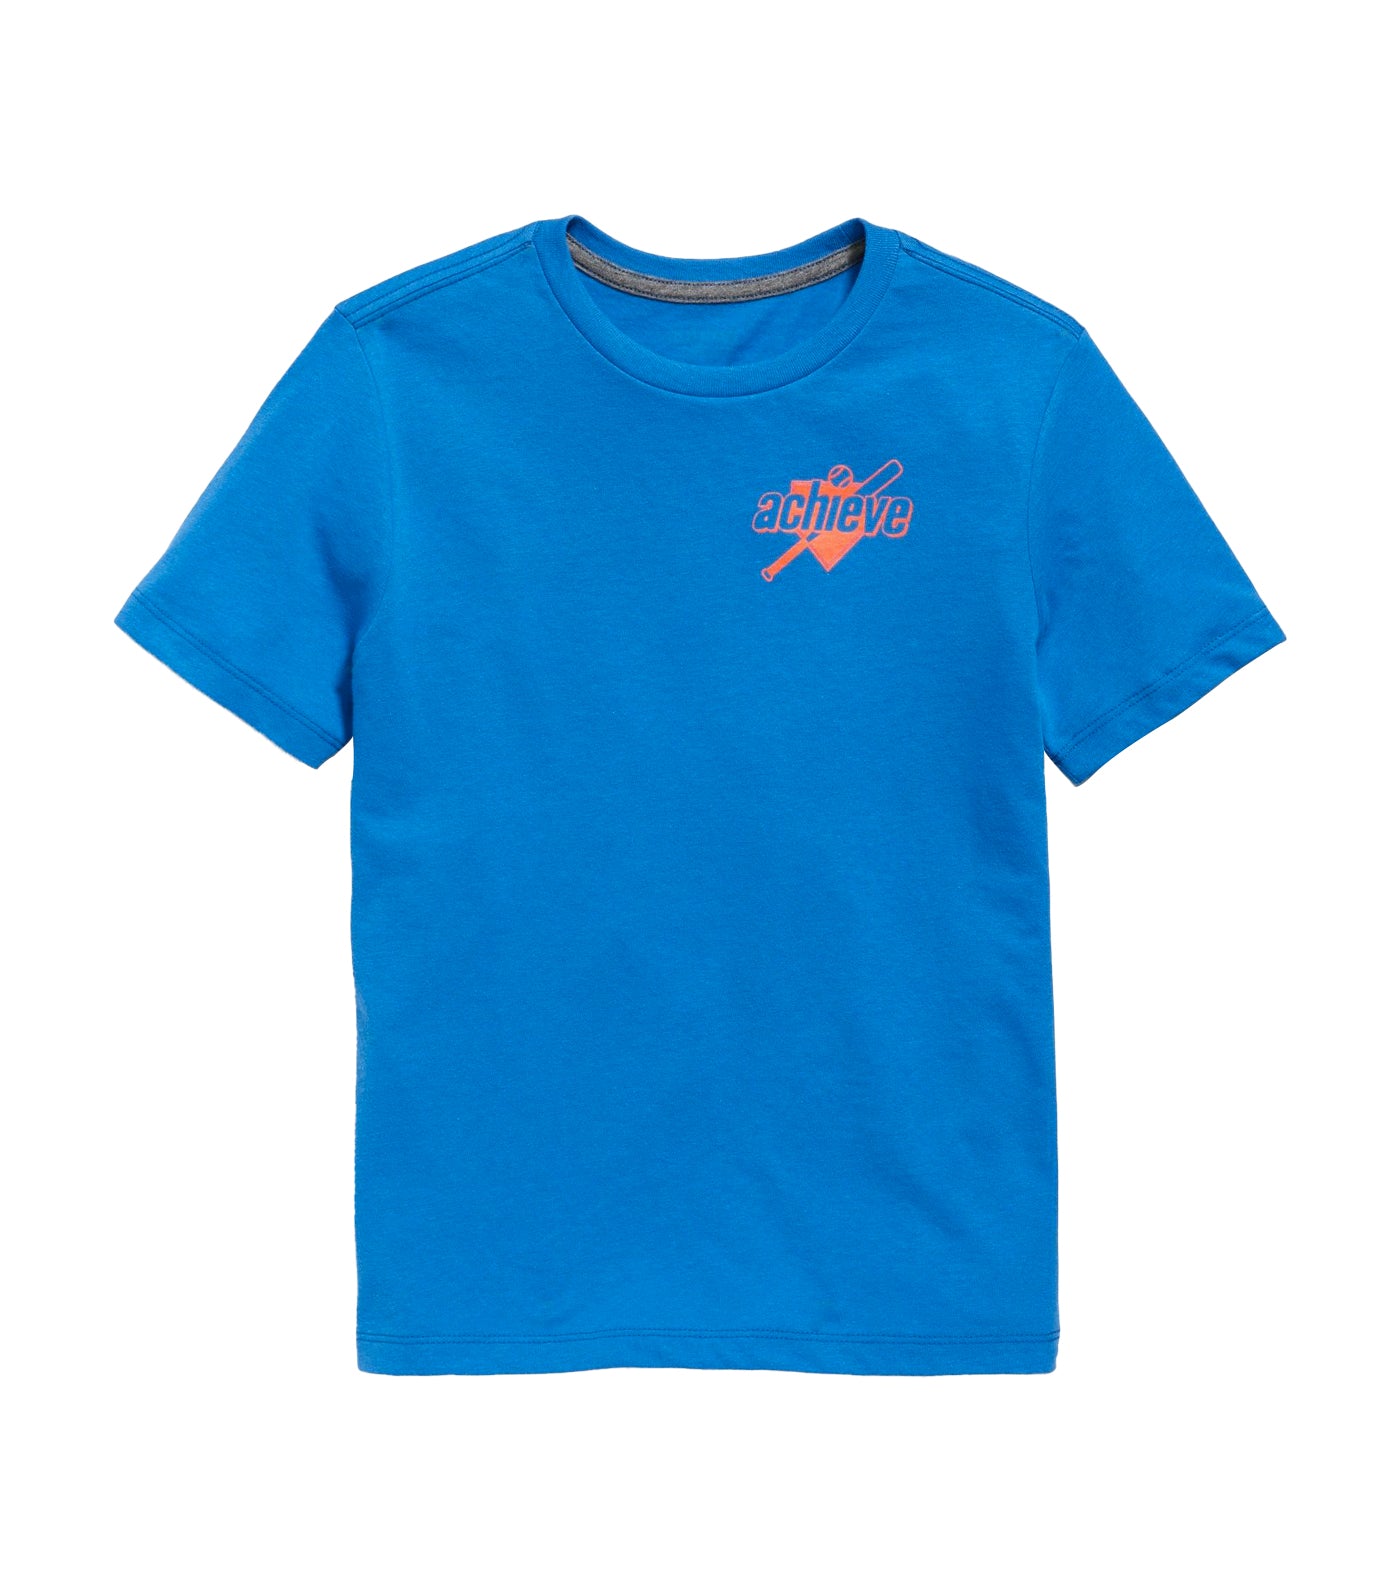 Short-Sleeve Graphic T-Shirt for Boys Bright Zephyr